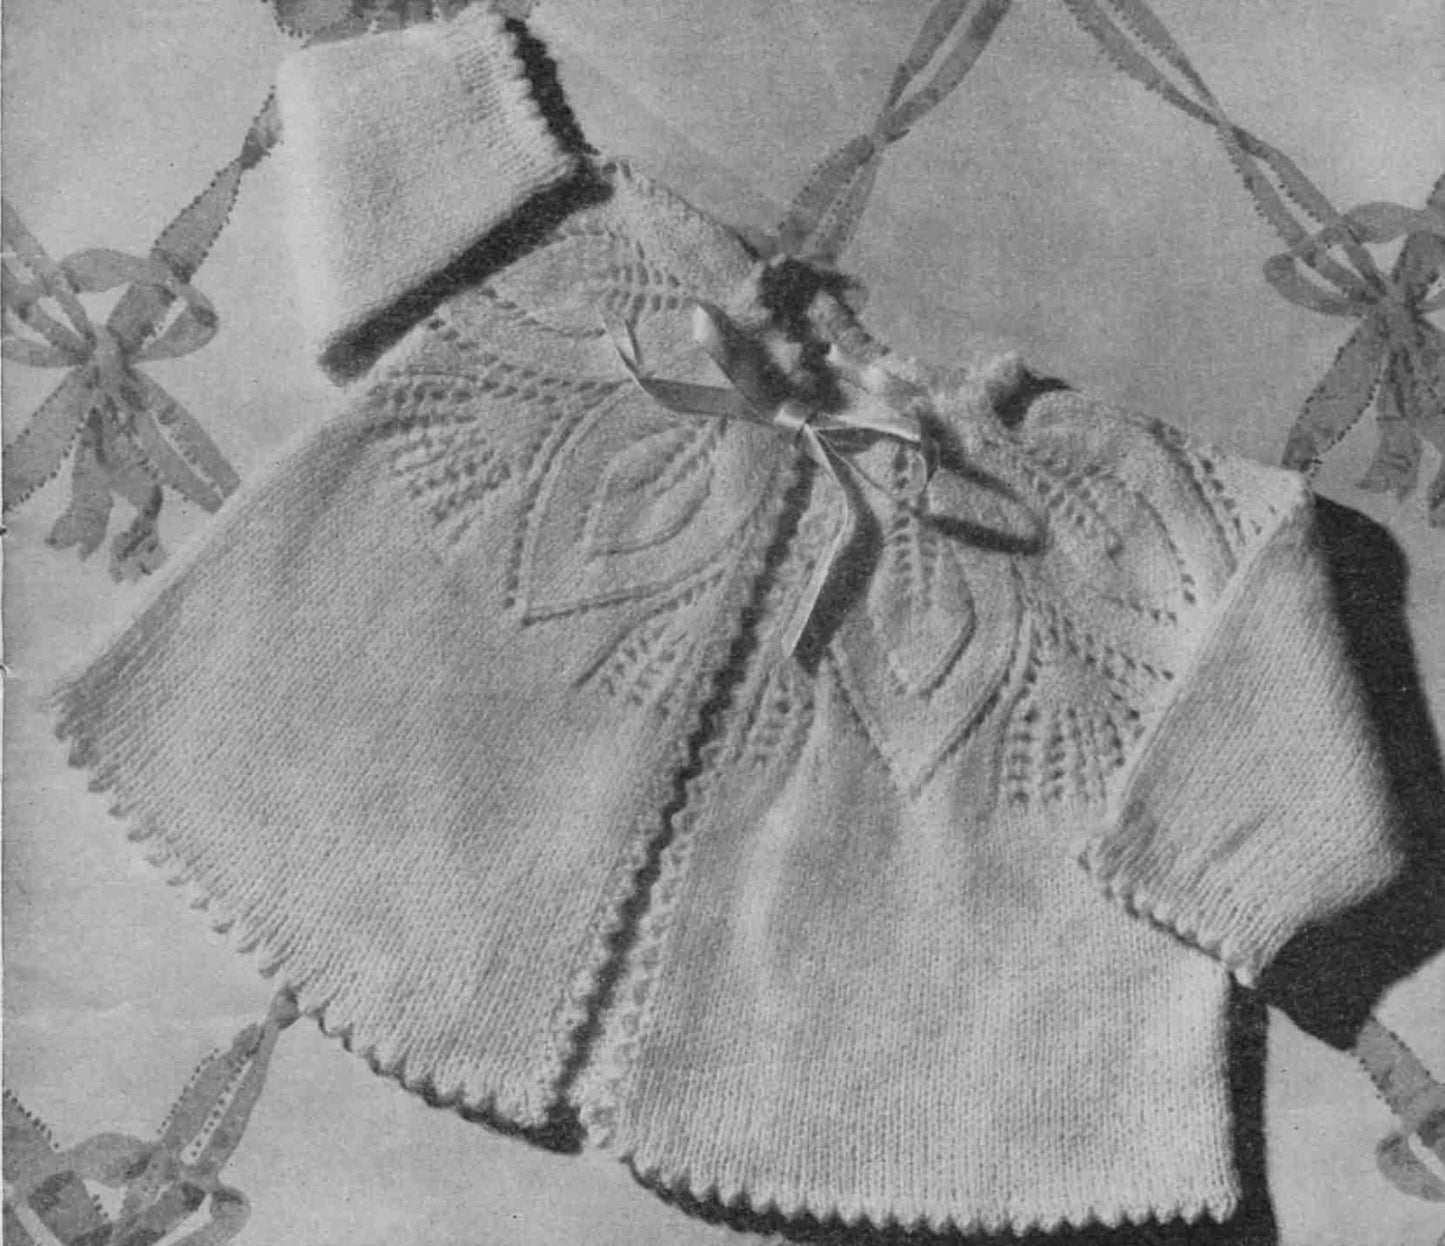 Vintage Baby Matinee Coat in 3 Style's, 1-9 months, Baby Wool, Knitting Pattern, 50s (PDF) P&B 363